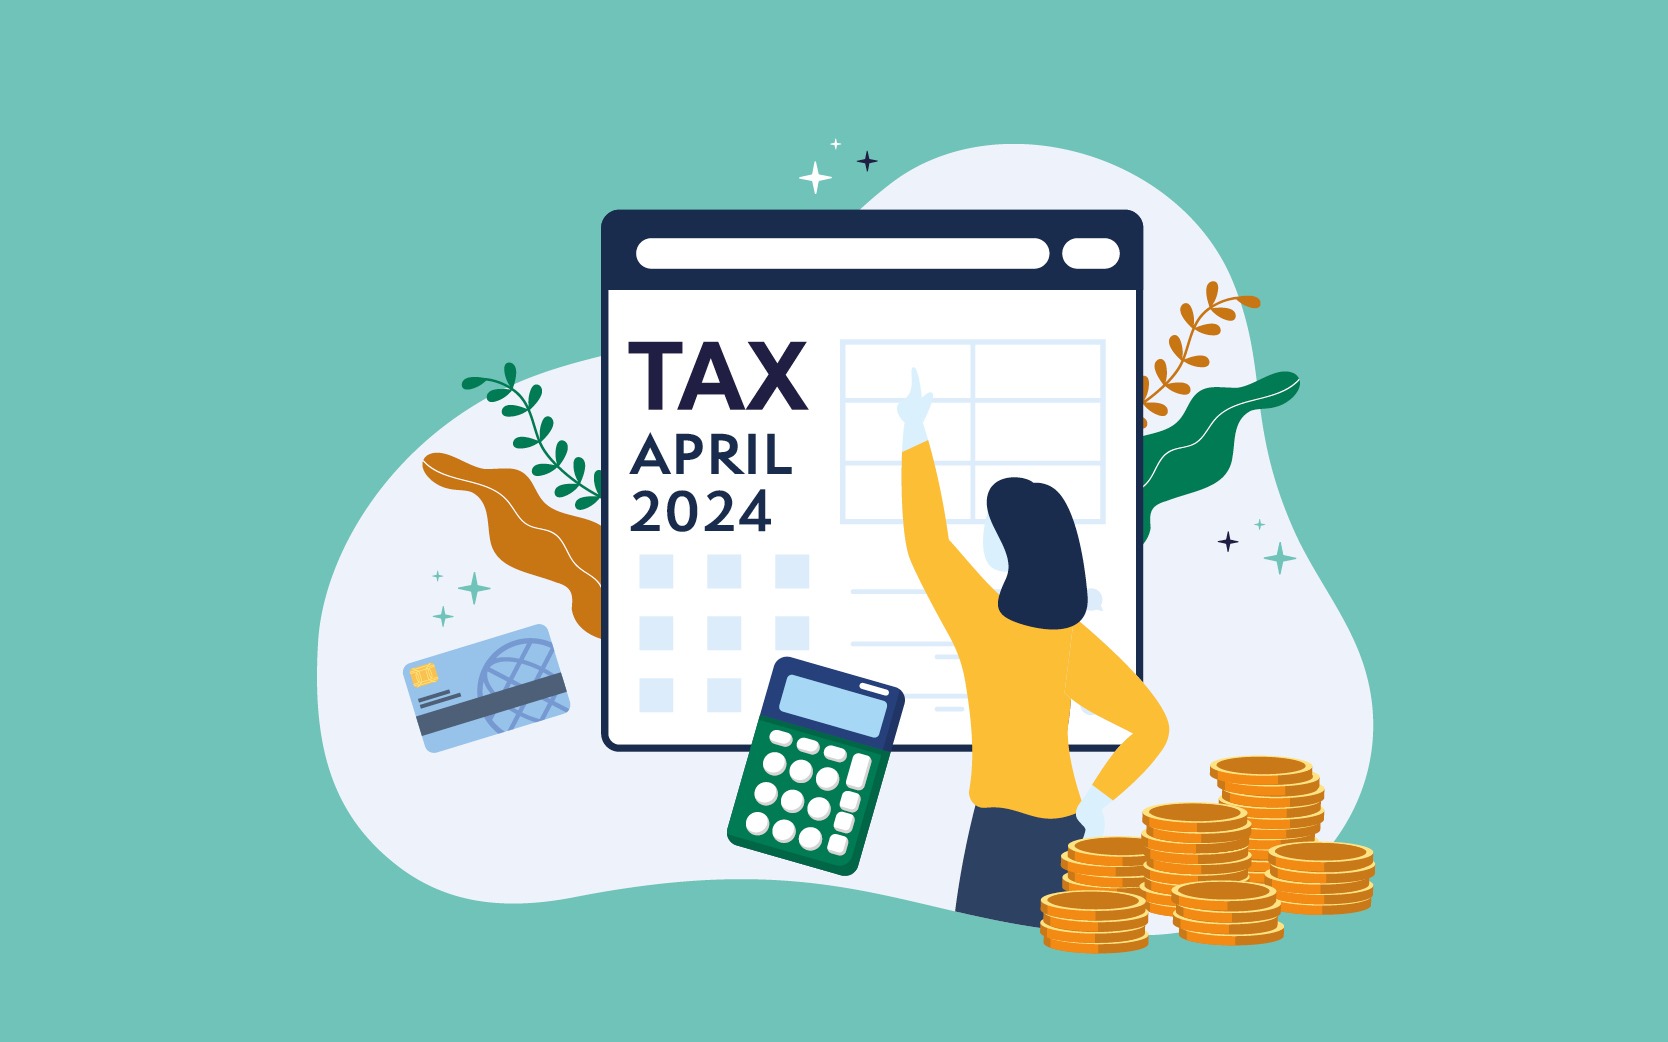 Tax planning for businesses and self-employed for financial year